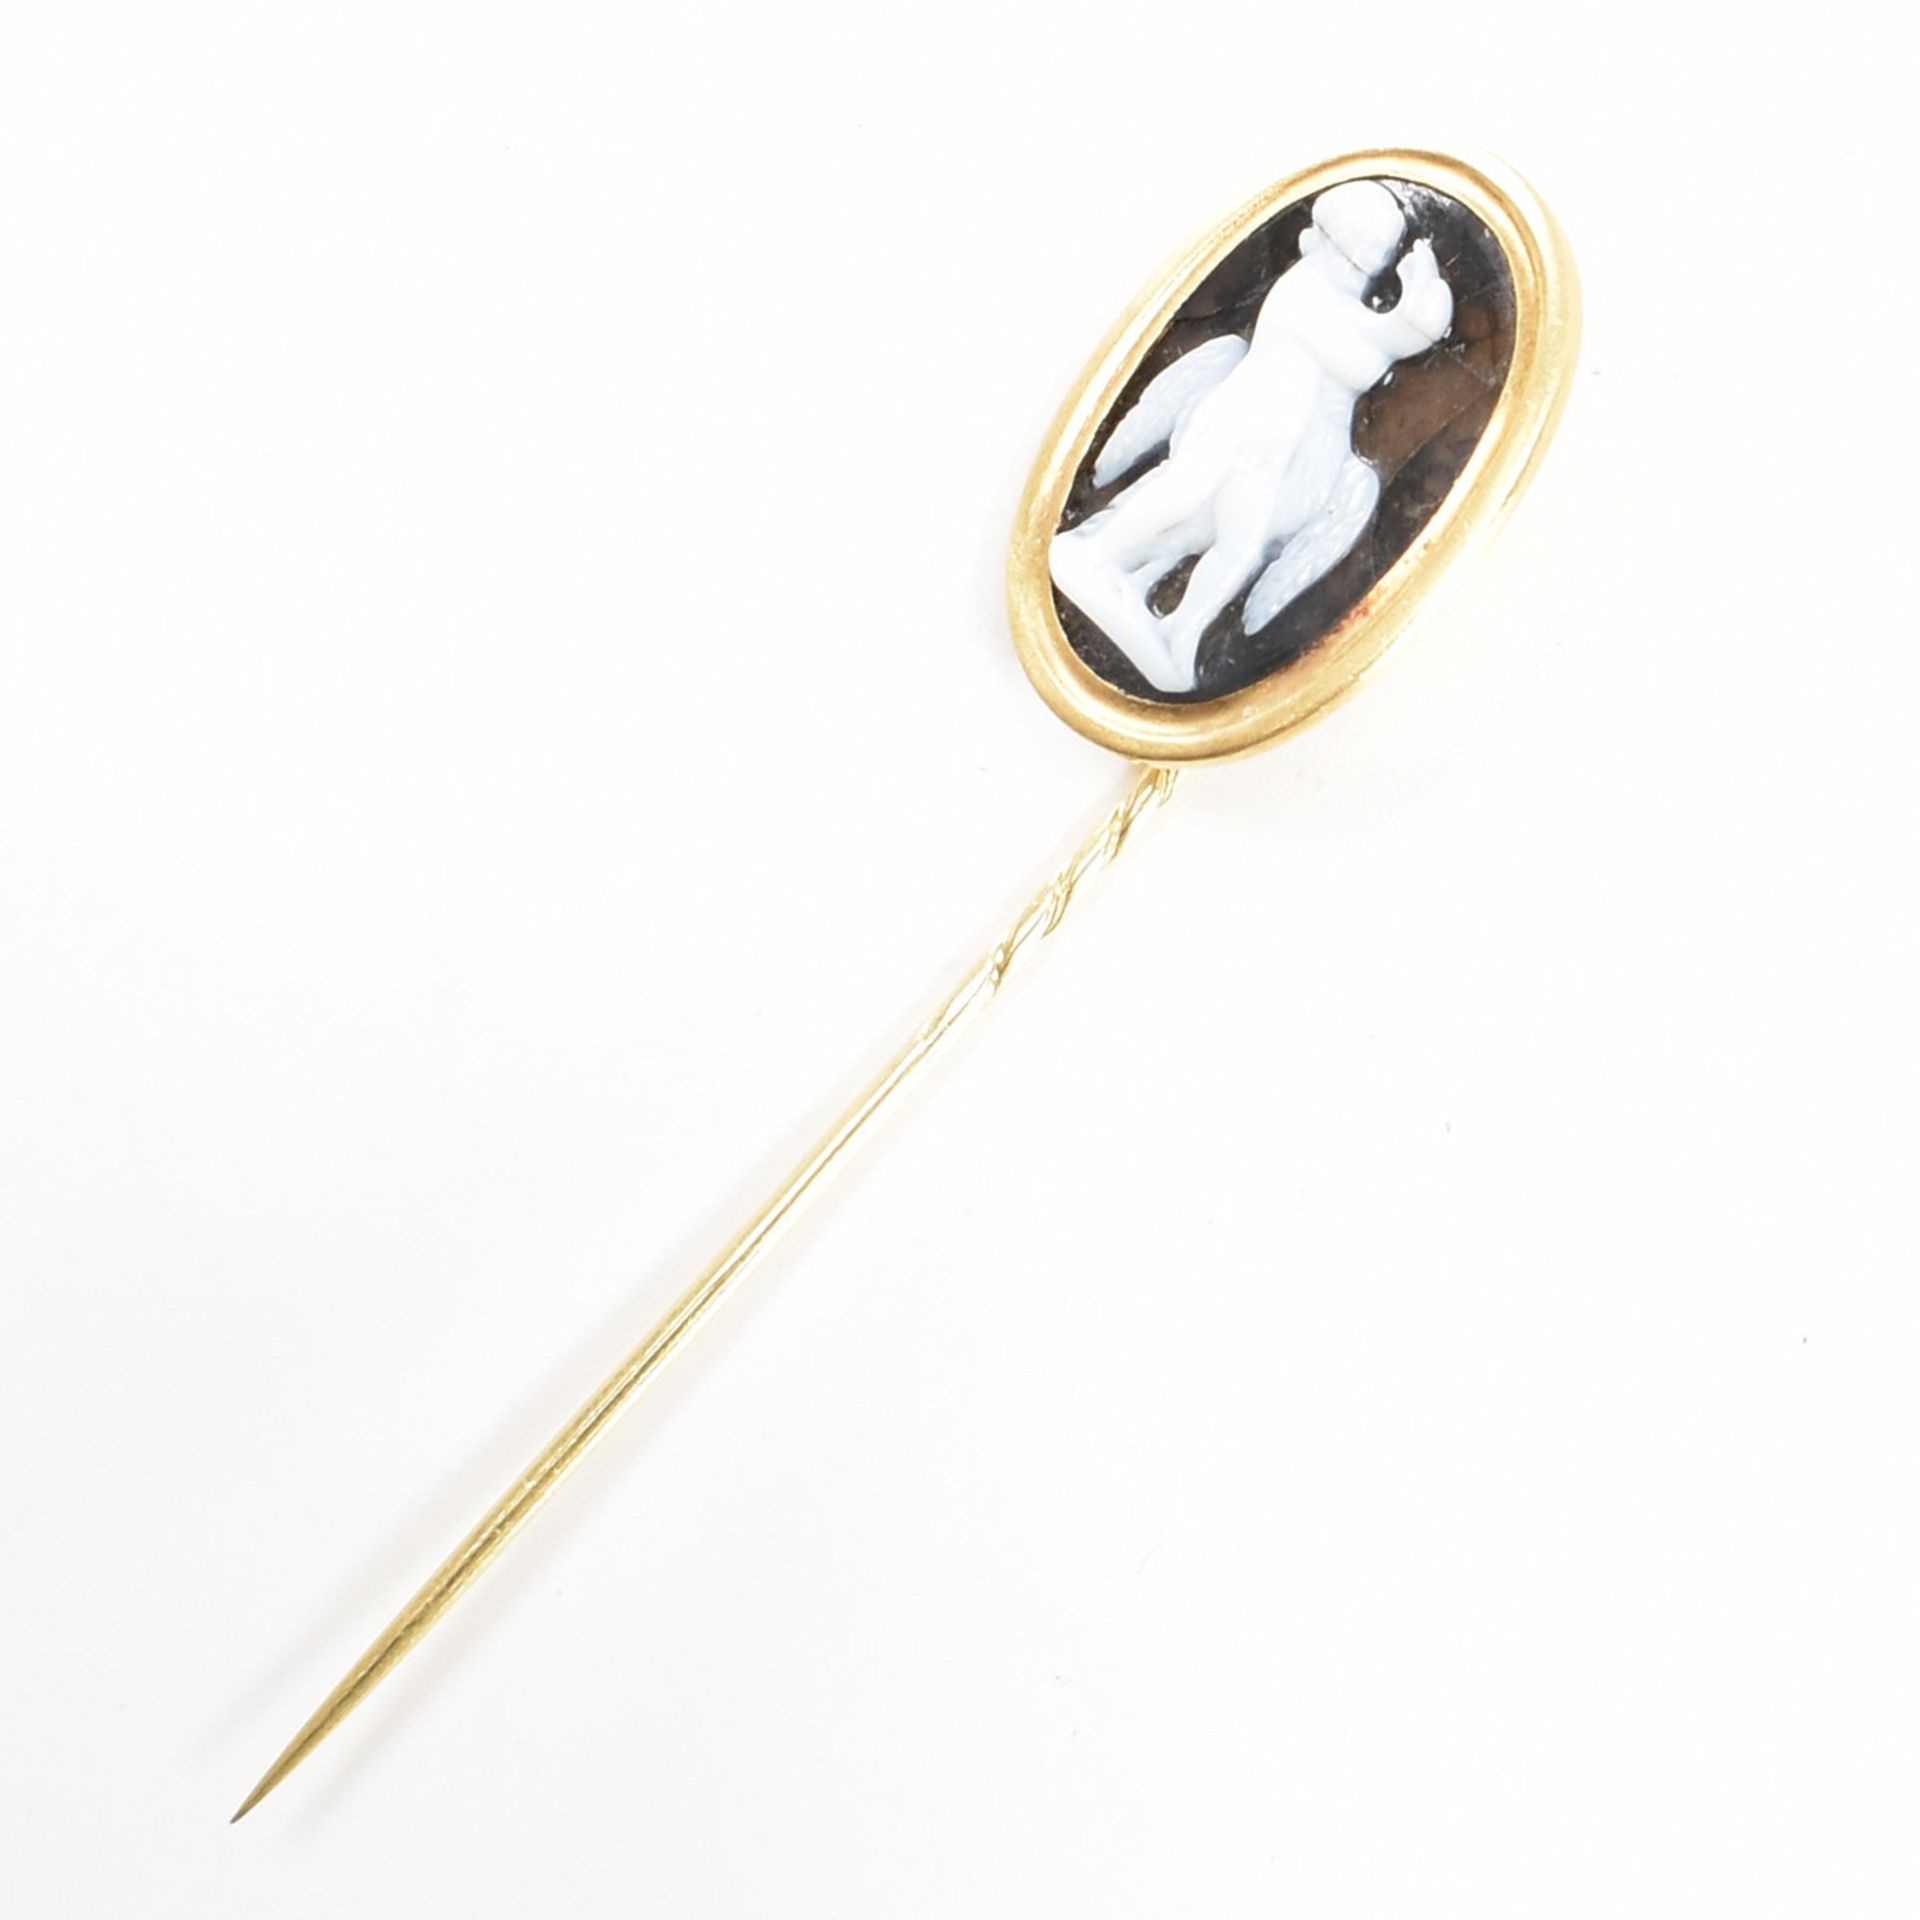 VICTORIAN GOLD & CARVED HARD STONE CAMEO PIN